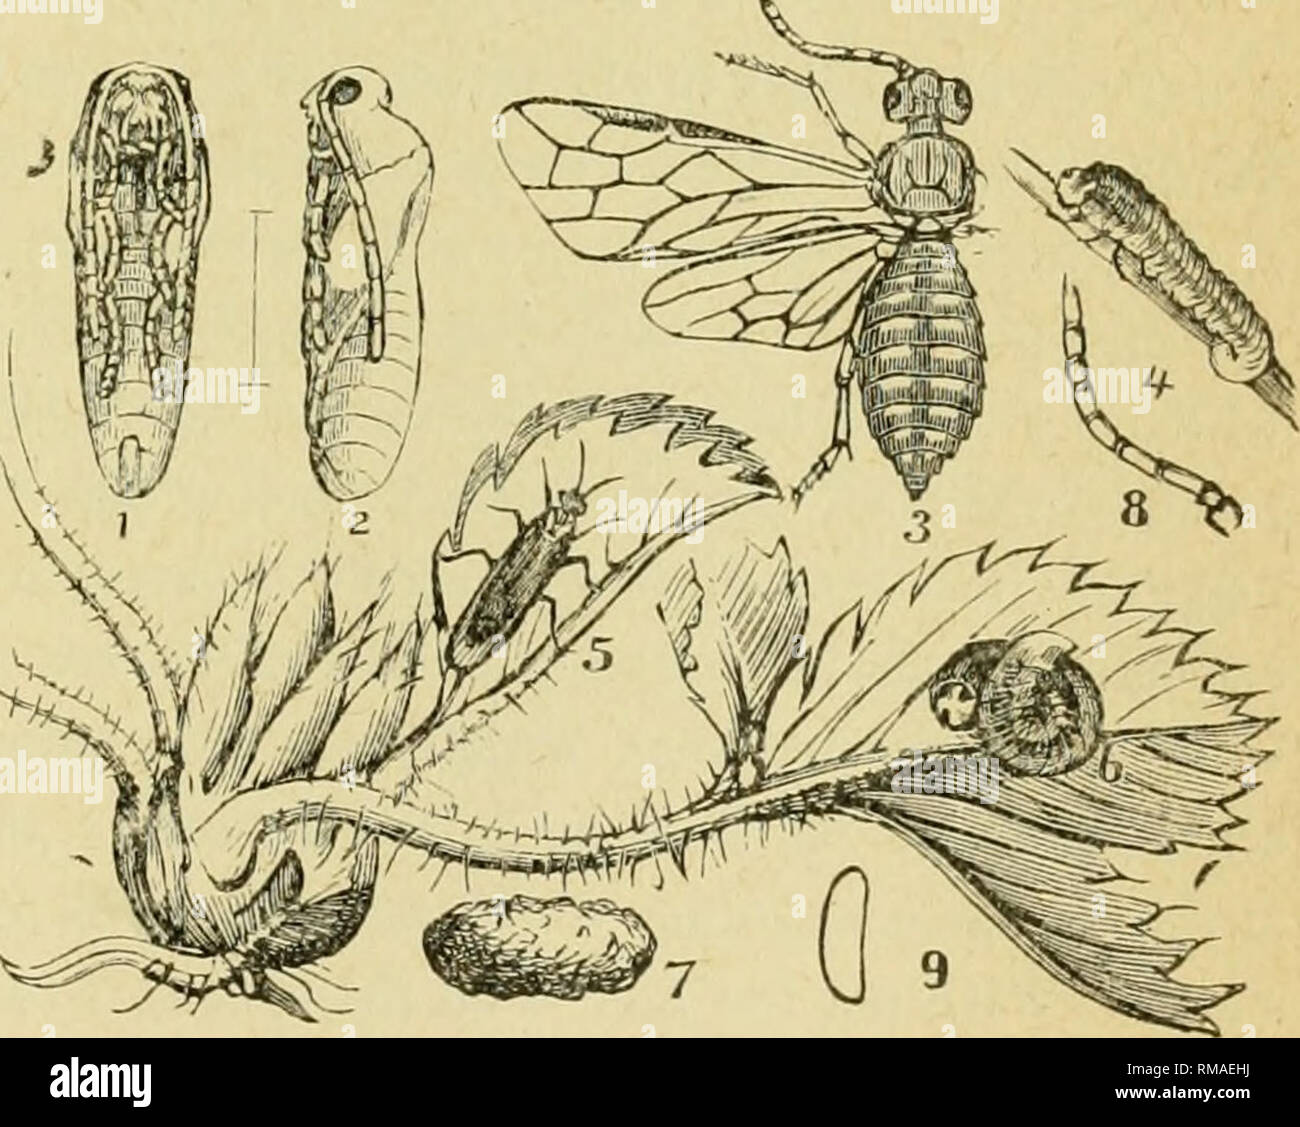 . Annual report. Entomological Society of Ontario; Insect pests; Insects -- Ontario Periodicals. • Fig-. .58. Flea-beetle and larva. B. AttackiiHj the Leaces : 1. Brownish caterpillars in June and August rolling the leaves into cases, and faateniwg them with silk. Strairherry Lenf-RoUei (Phoxopteris fragariae), Fig. 57. 2. Young plants gnawed oif at the surface. C'uhourms. 3. Small, pale spotted, active beetles riddle the leaves with holes im June. Spotted Paria (Paria-6-notata). 4. A small, active, jumping striped beetle eating holes in th« leaves. Striped Flea-Beetle (Phyllotreta vittata), F Stock Photo